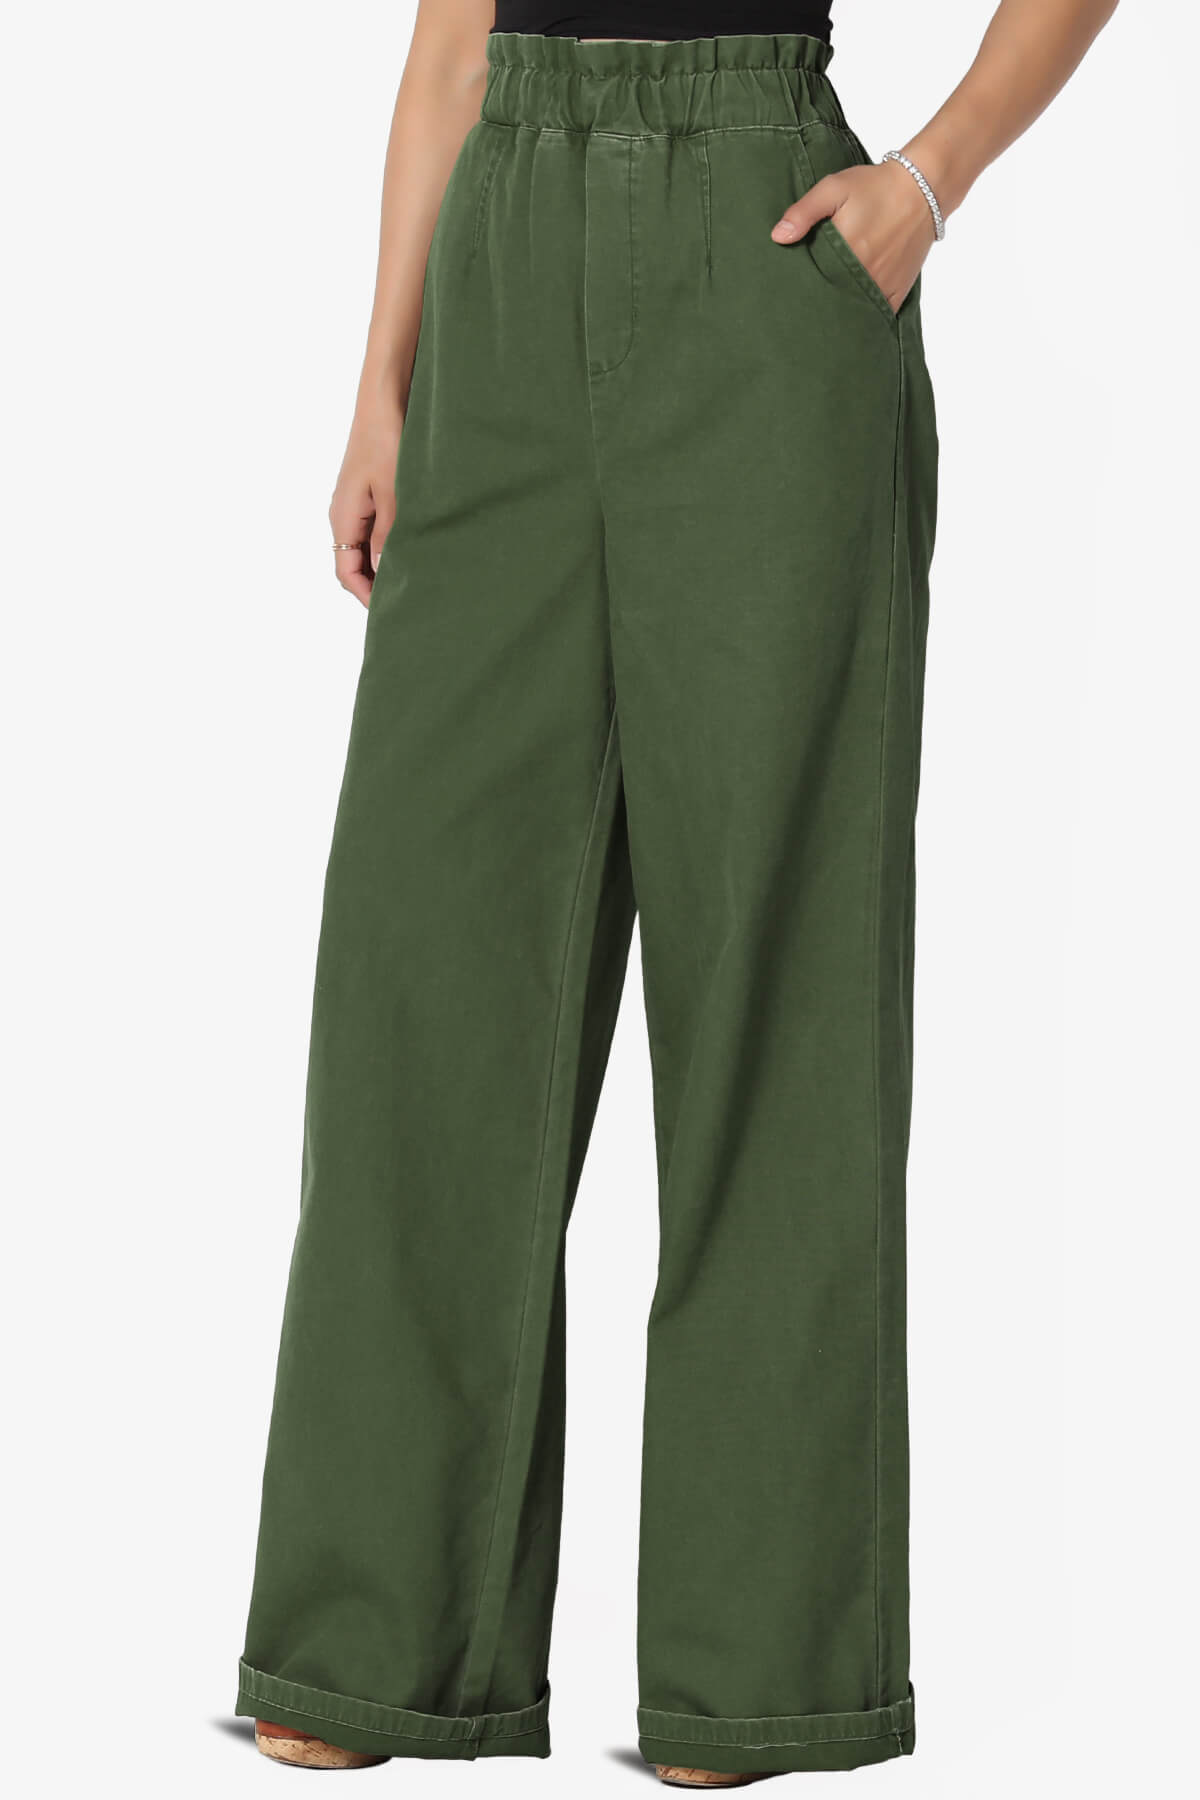 Load image into Gallery viewer, Fateful Twill High Waist Wide Leg Pants ARMY GREEN_3
